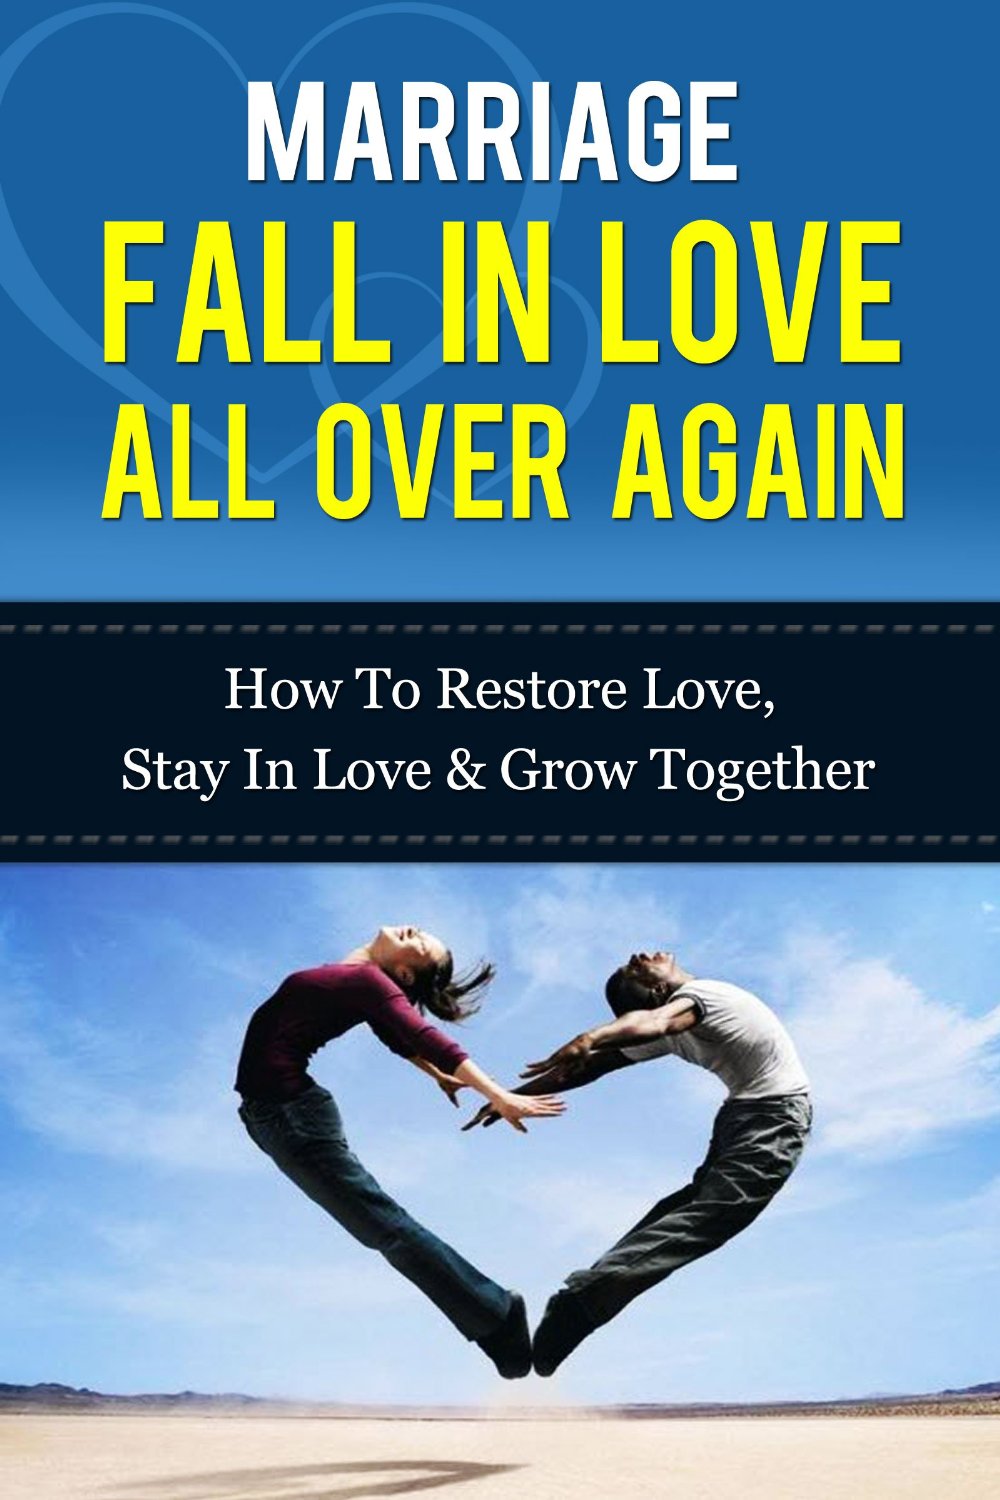 Marriage – Fall In Love All Over Again by Lilli Morgan